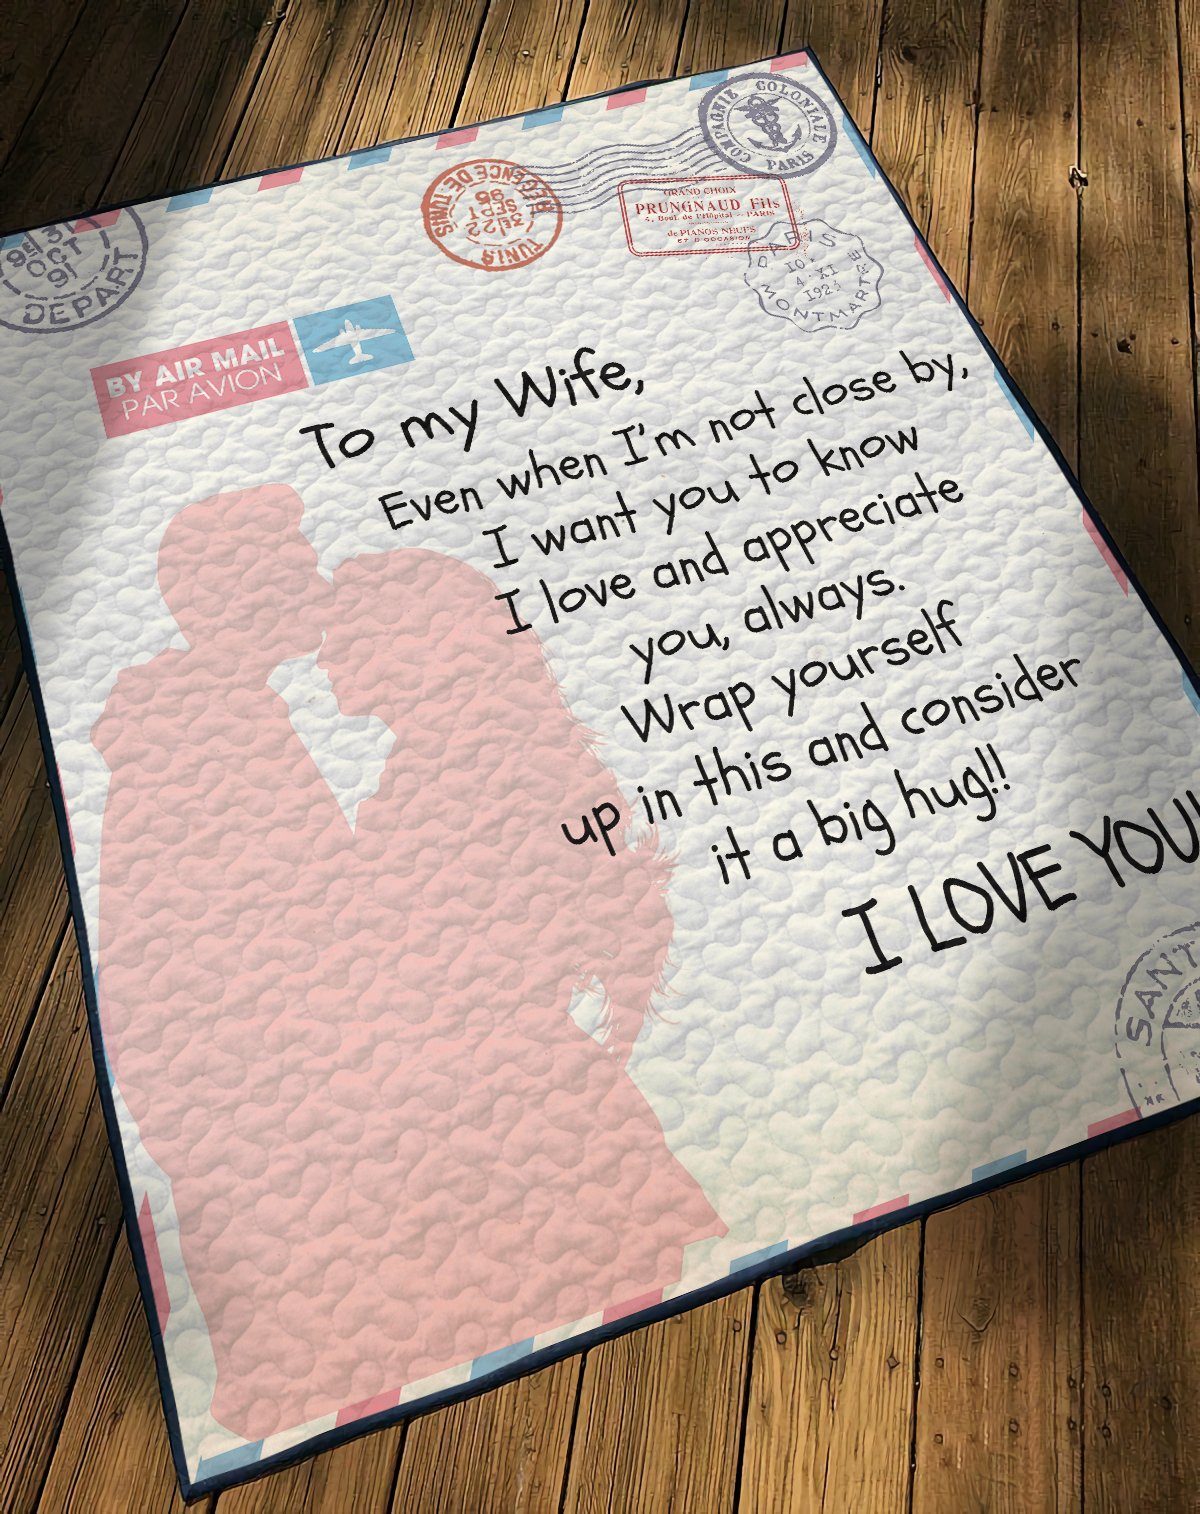 Gearhuman 3D To My Wife Long Distance Relationship Custom Quilt GB19011 Quilt 